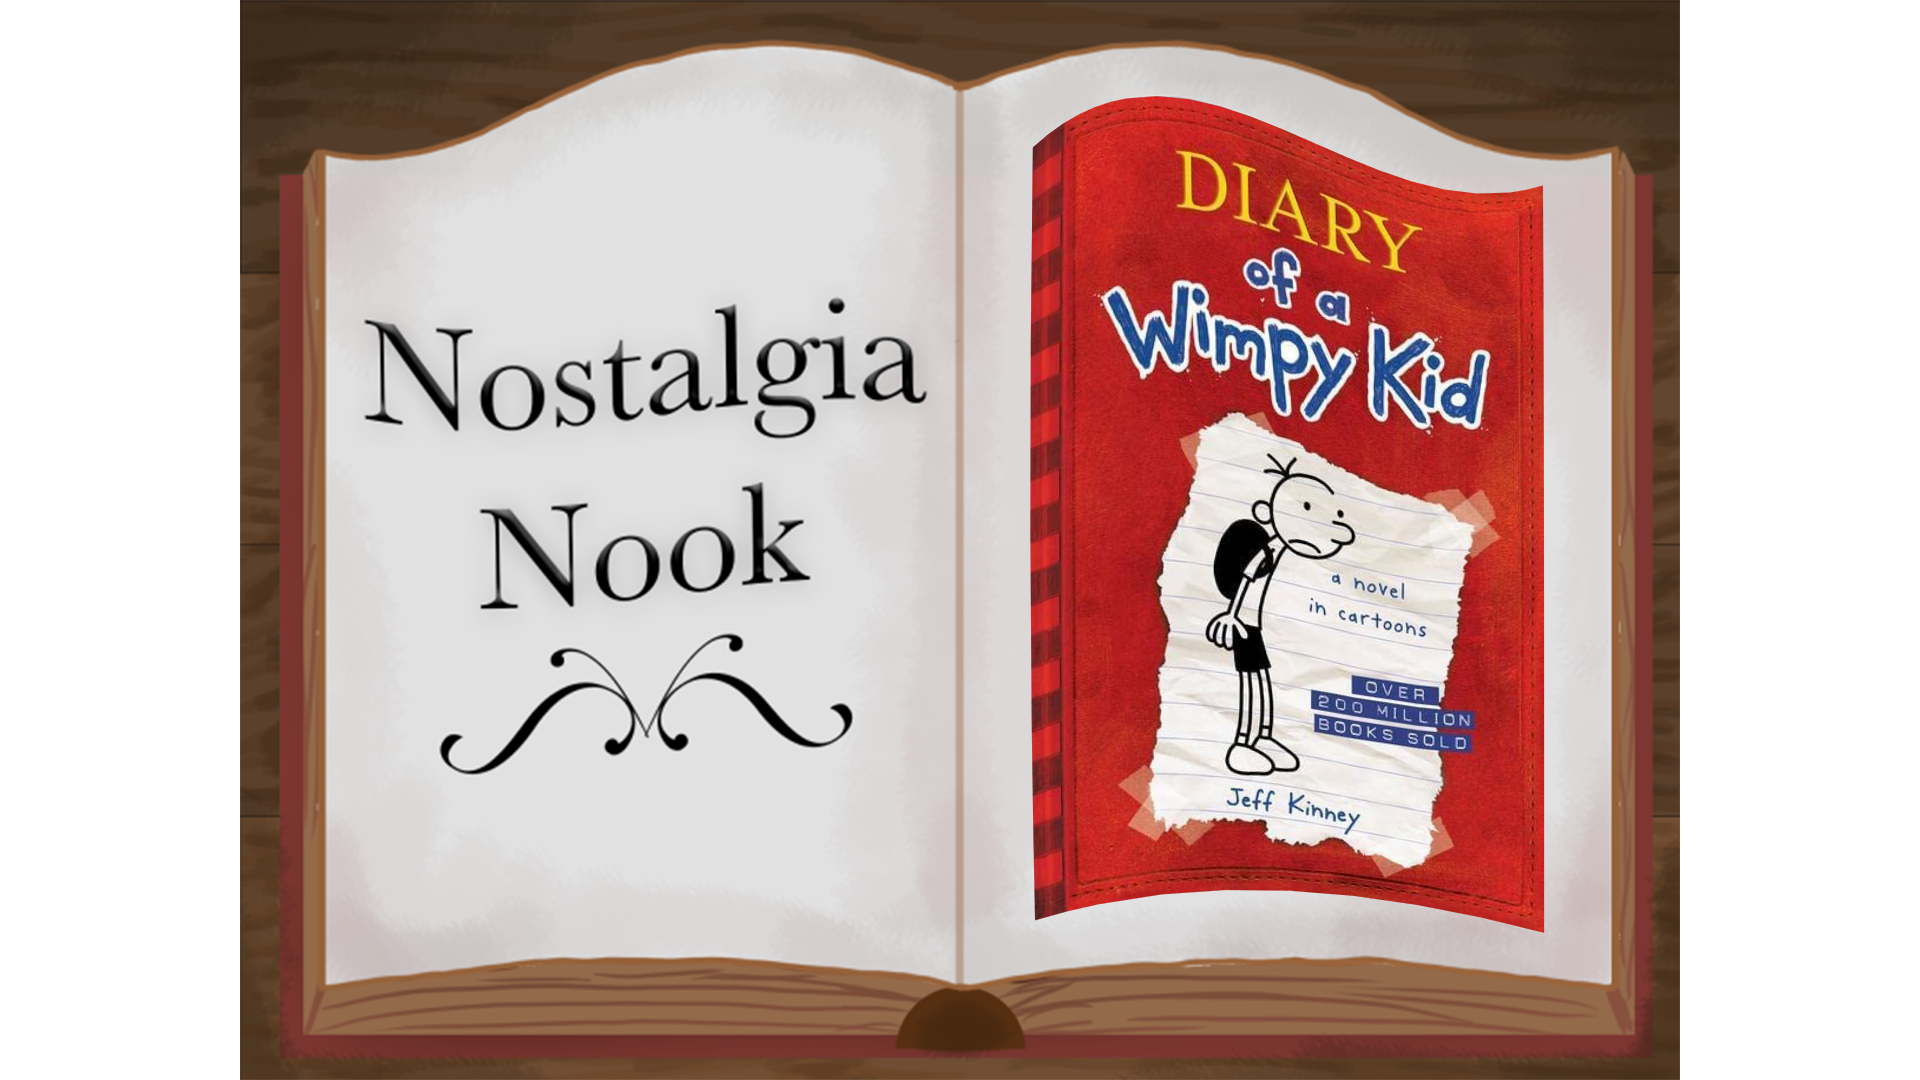 https://stanforddaily.com/wp-content/uploads/2022/11/nostalgia-nook-diary-of-a-wimpy-kid.png